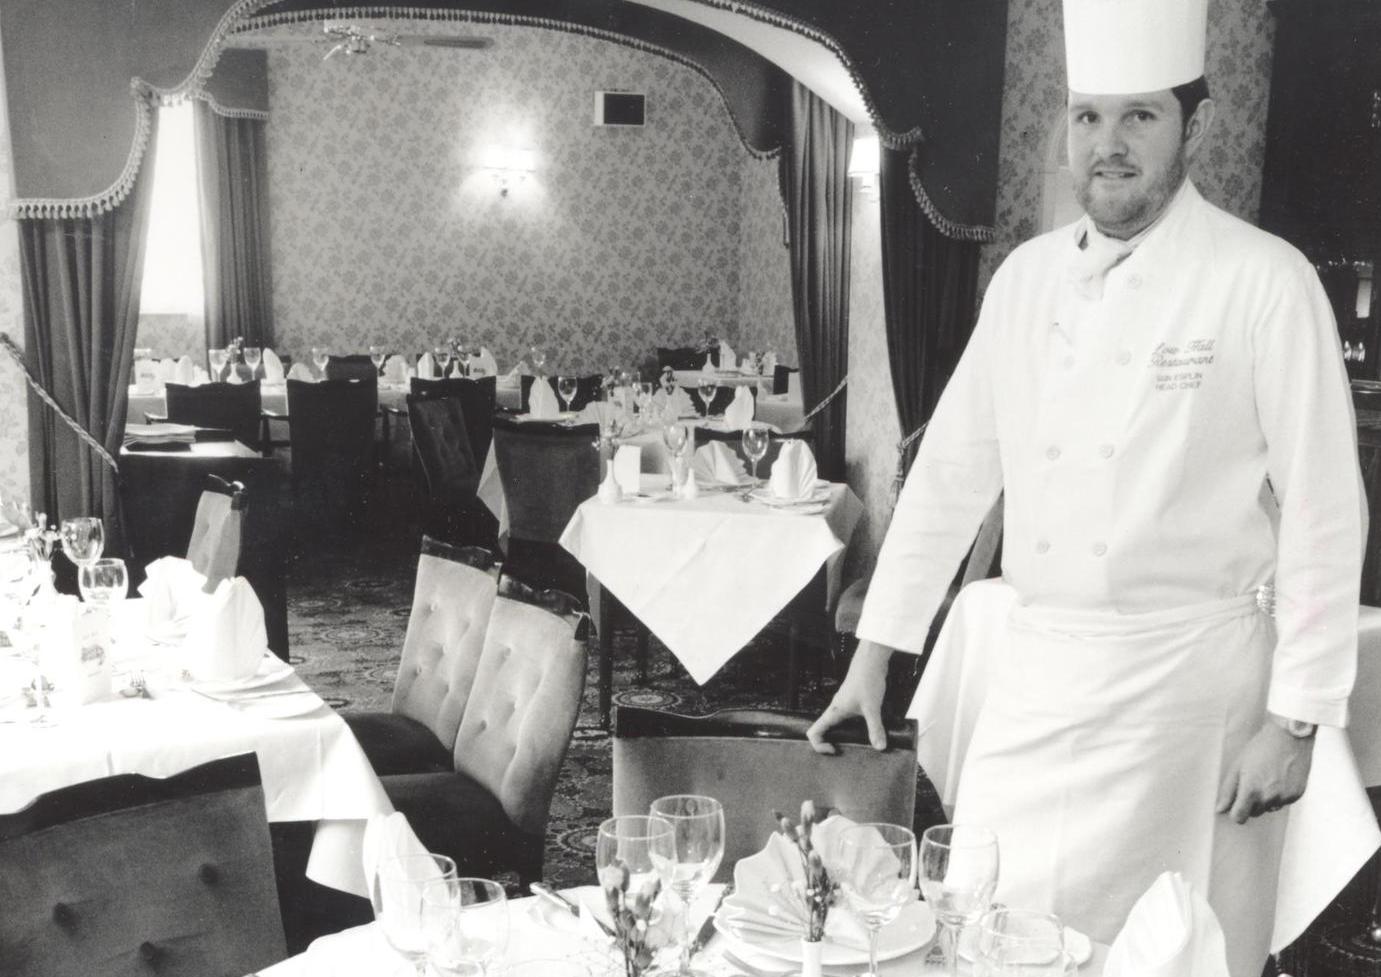 This is Iain Esplin who was head chef at Low Hall in Horsforth.